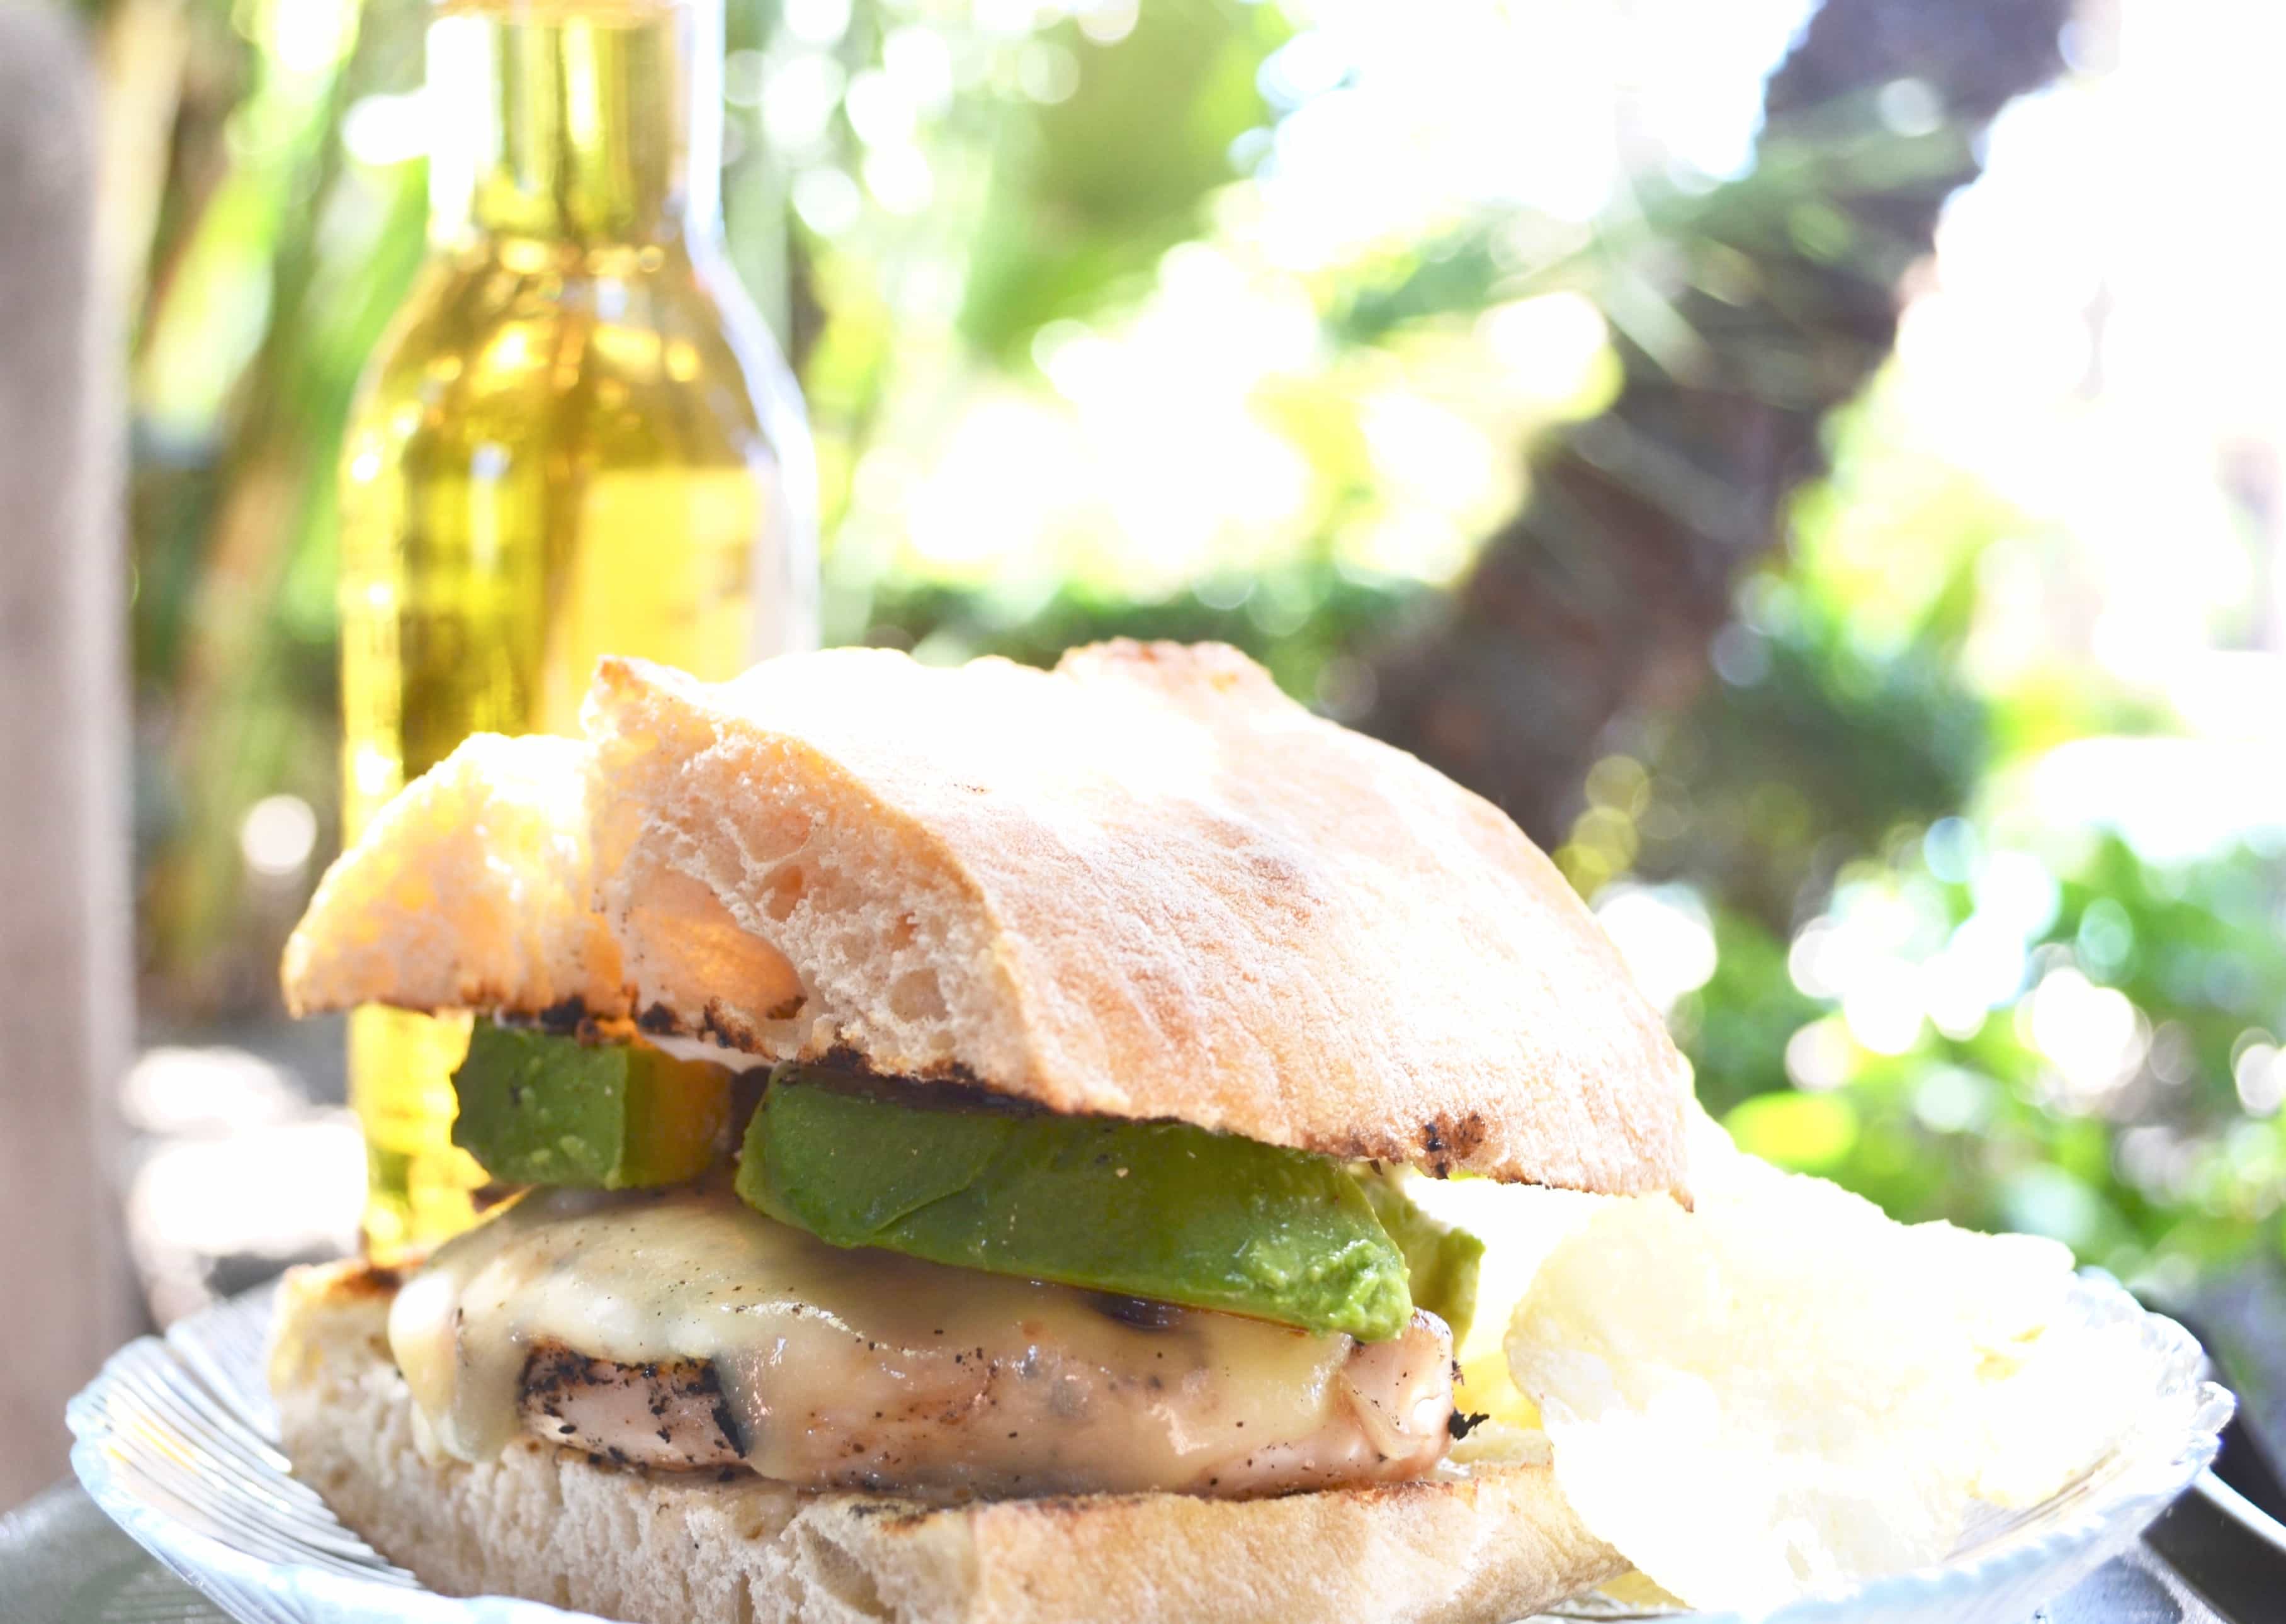 Grilled Chicken Sandwich Recipe for Camping - The Spicy Apron